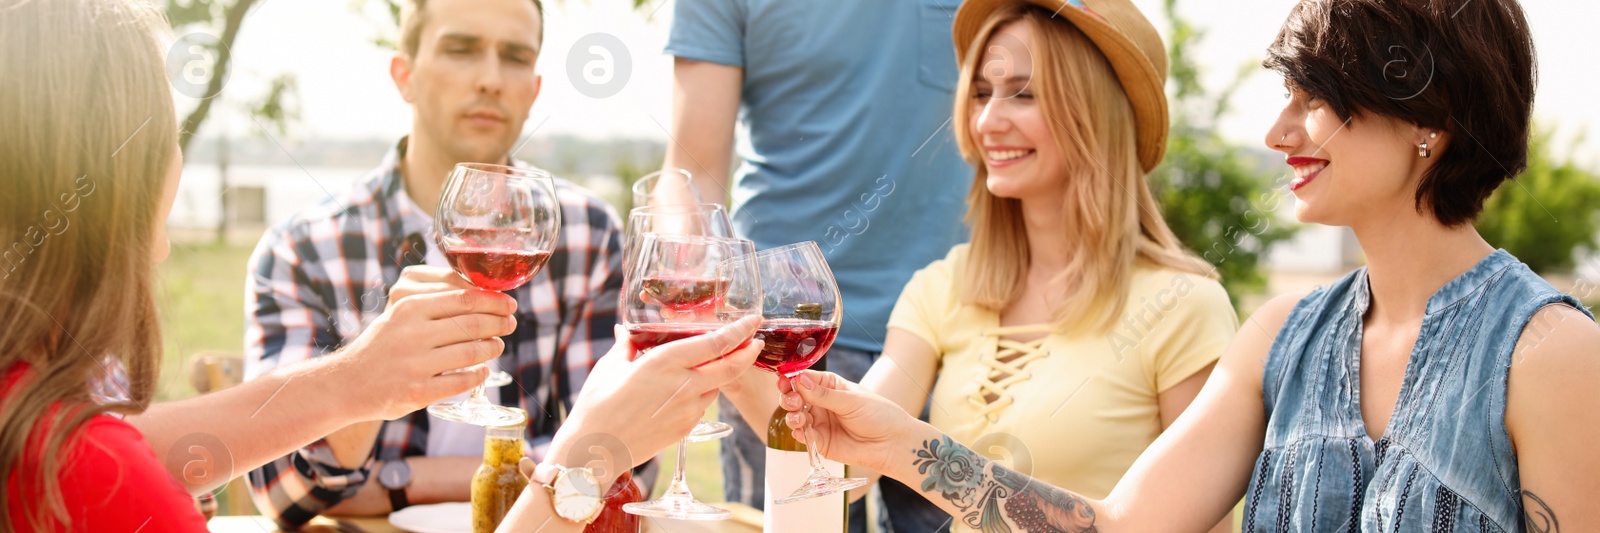 Image of Young people with glasses of wine at table outdoors. Banner design